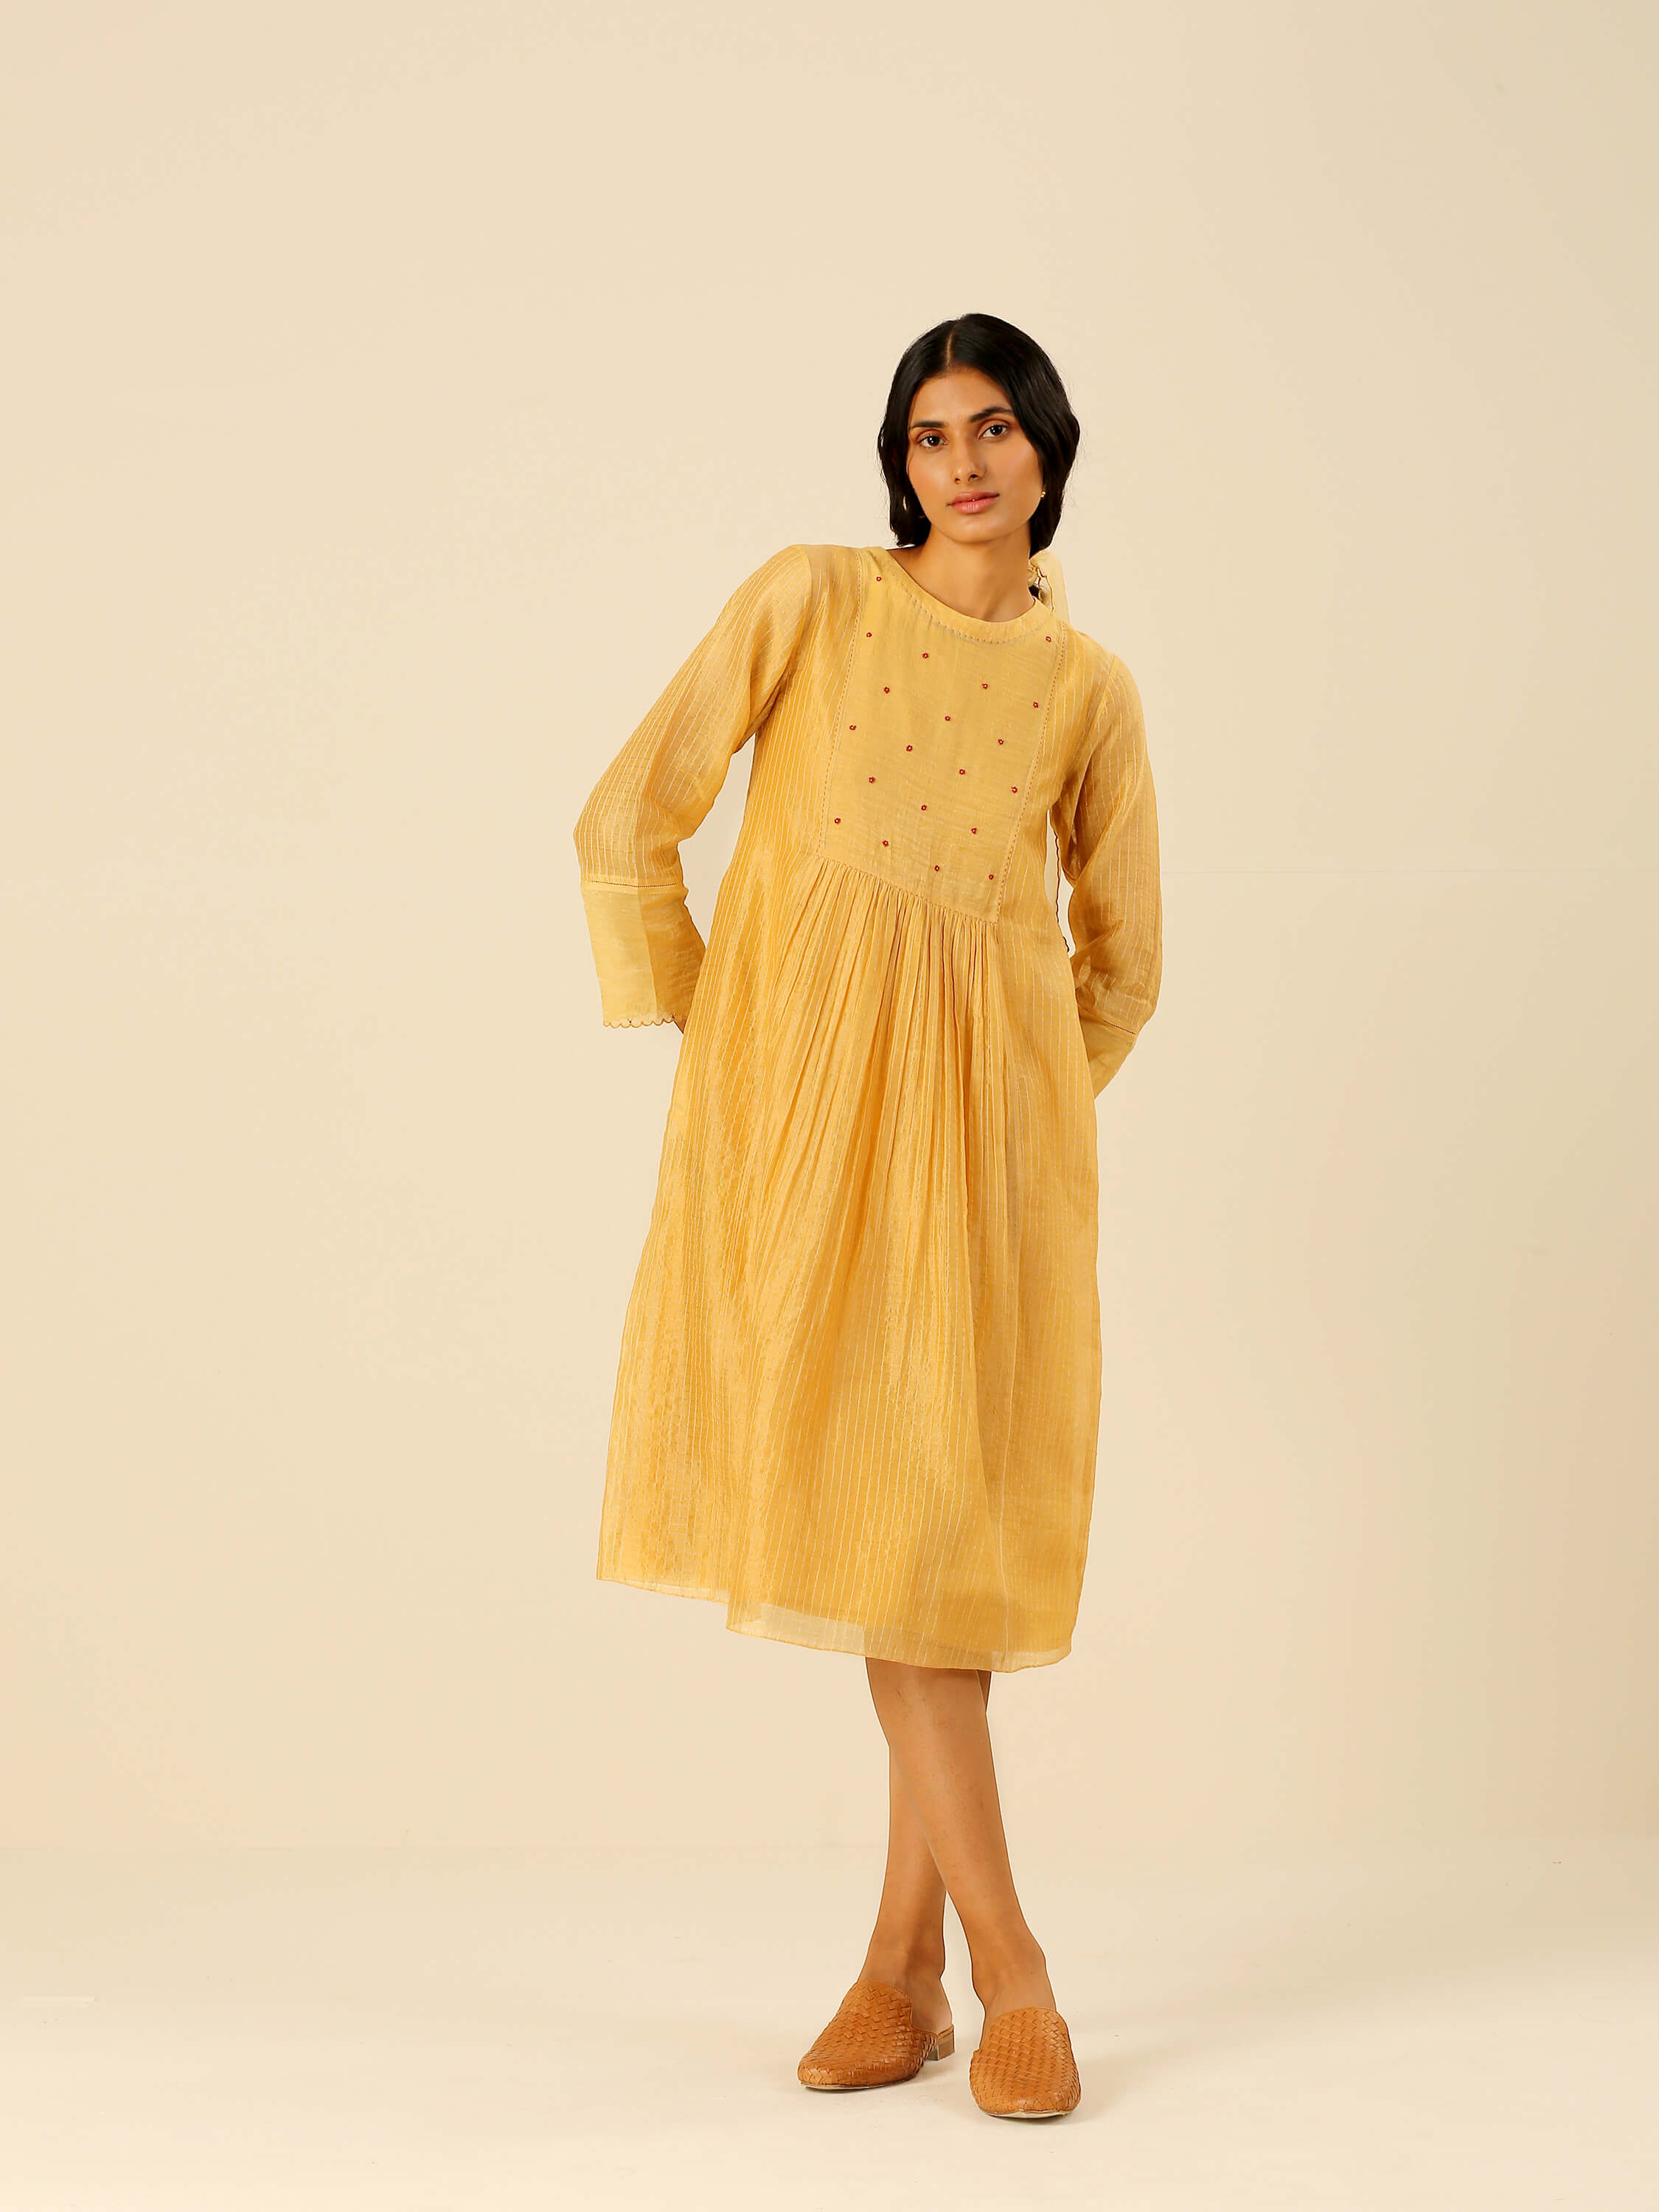 Woman in a yellow midi dress with woven mules posing.